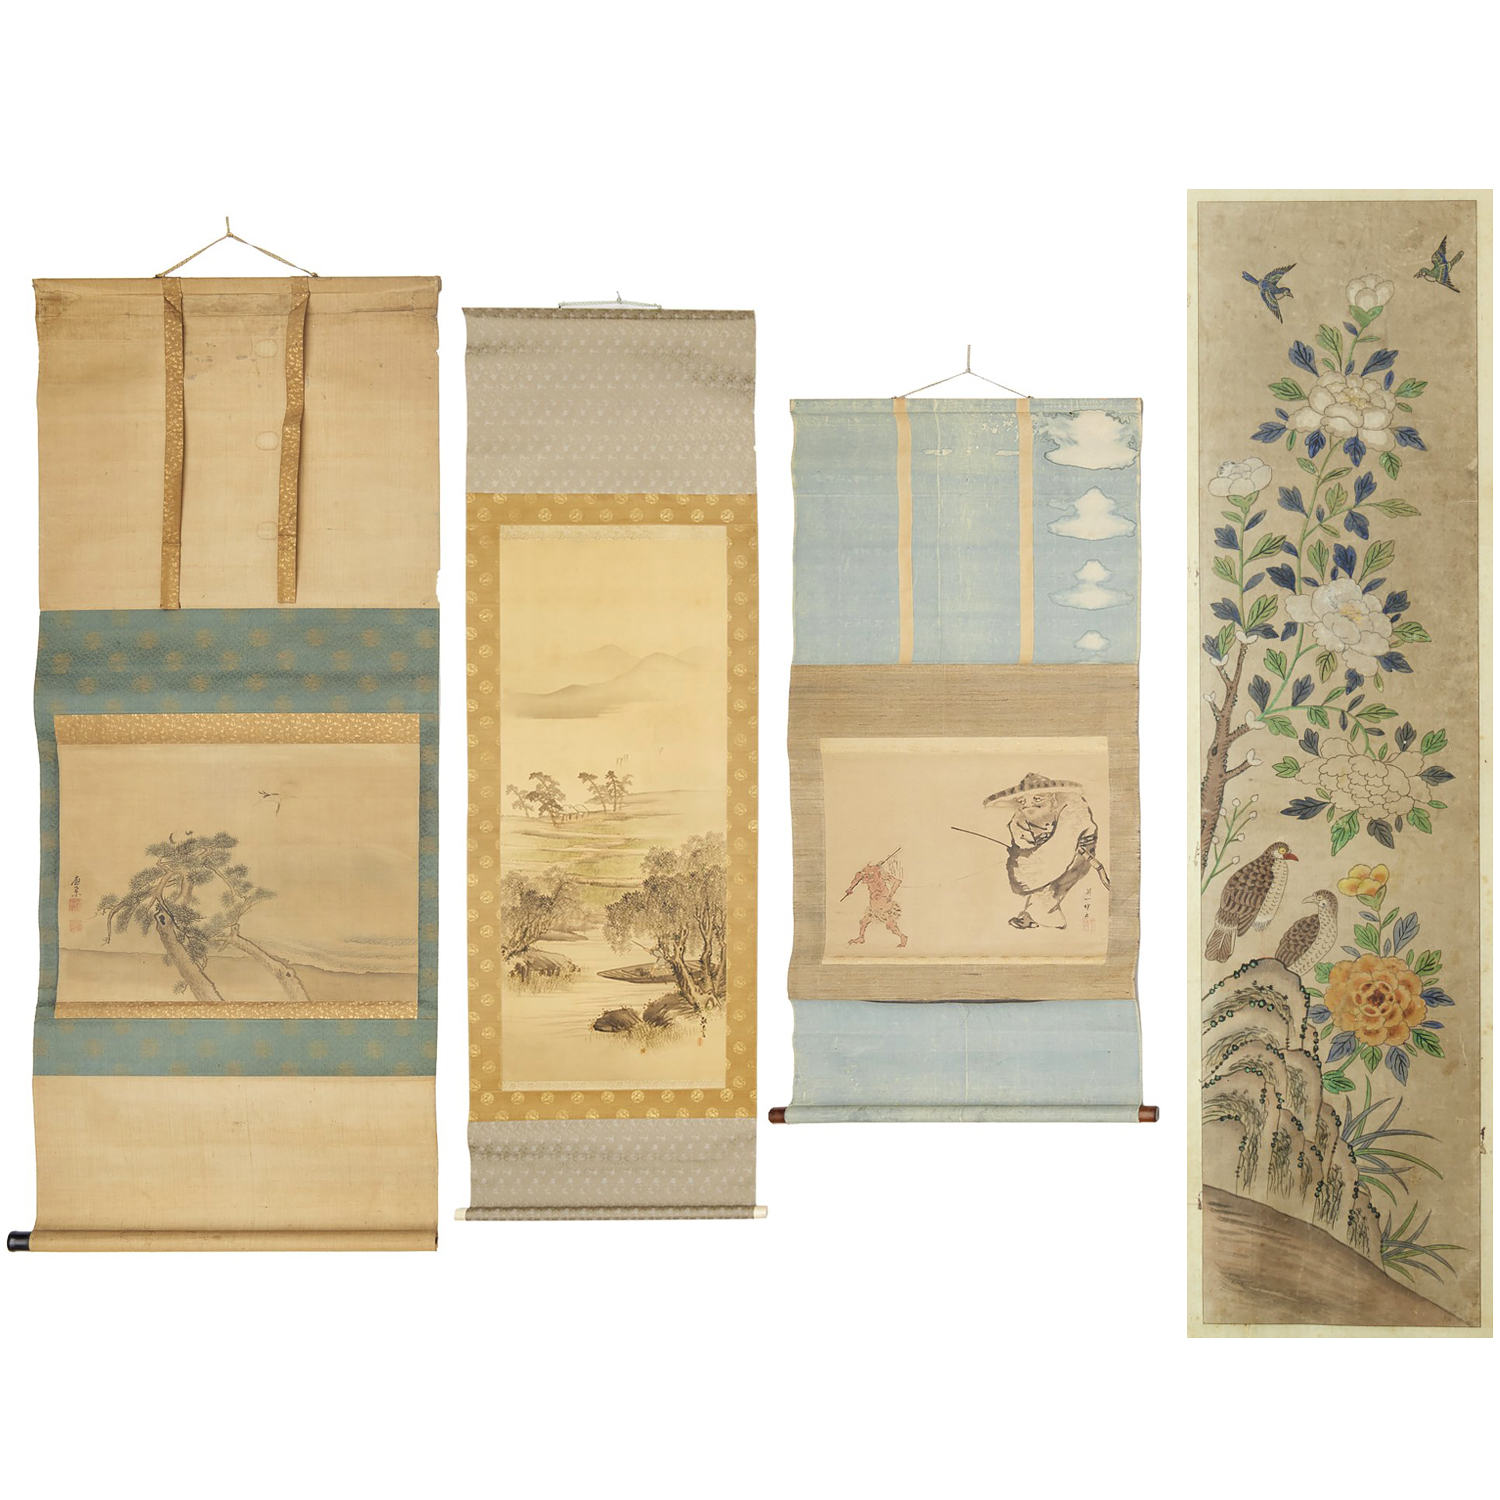 GROUP 4 JAPANESE SCROLL PAINTINGS 30bffd